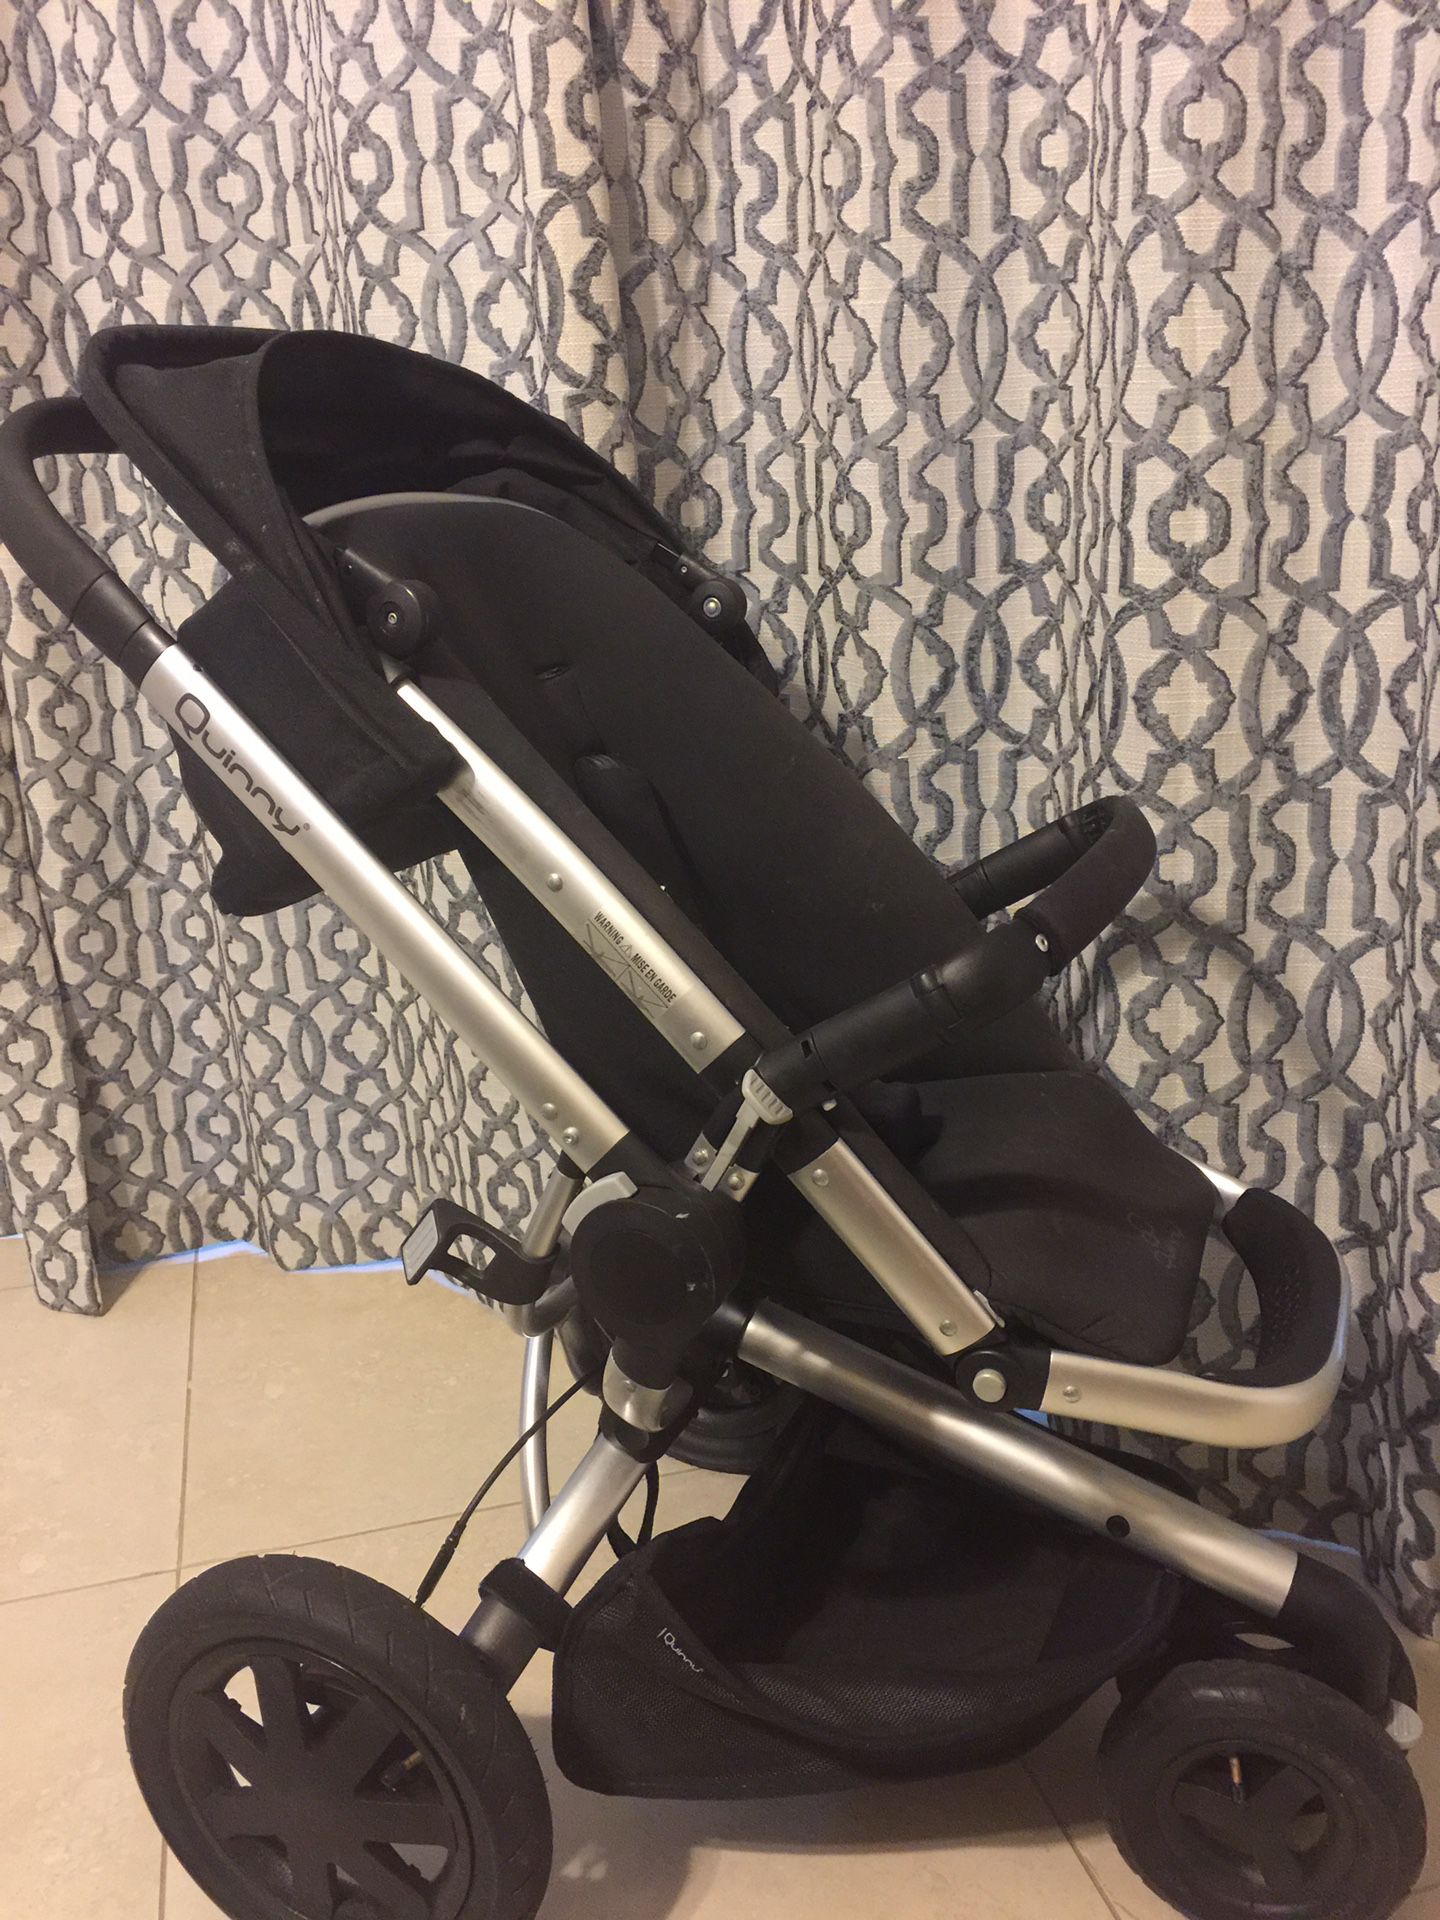 Quinny Buzz stroller with Maxi Cosi car seat